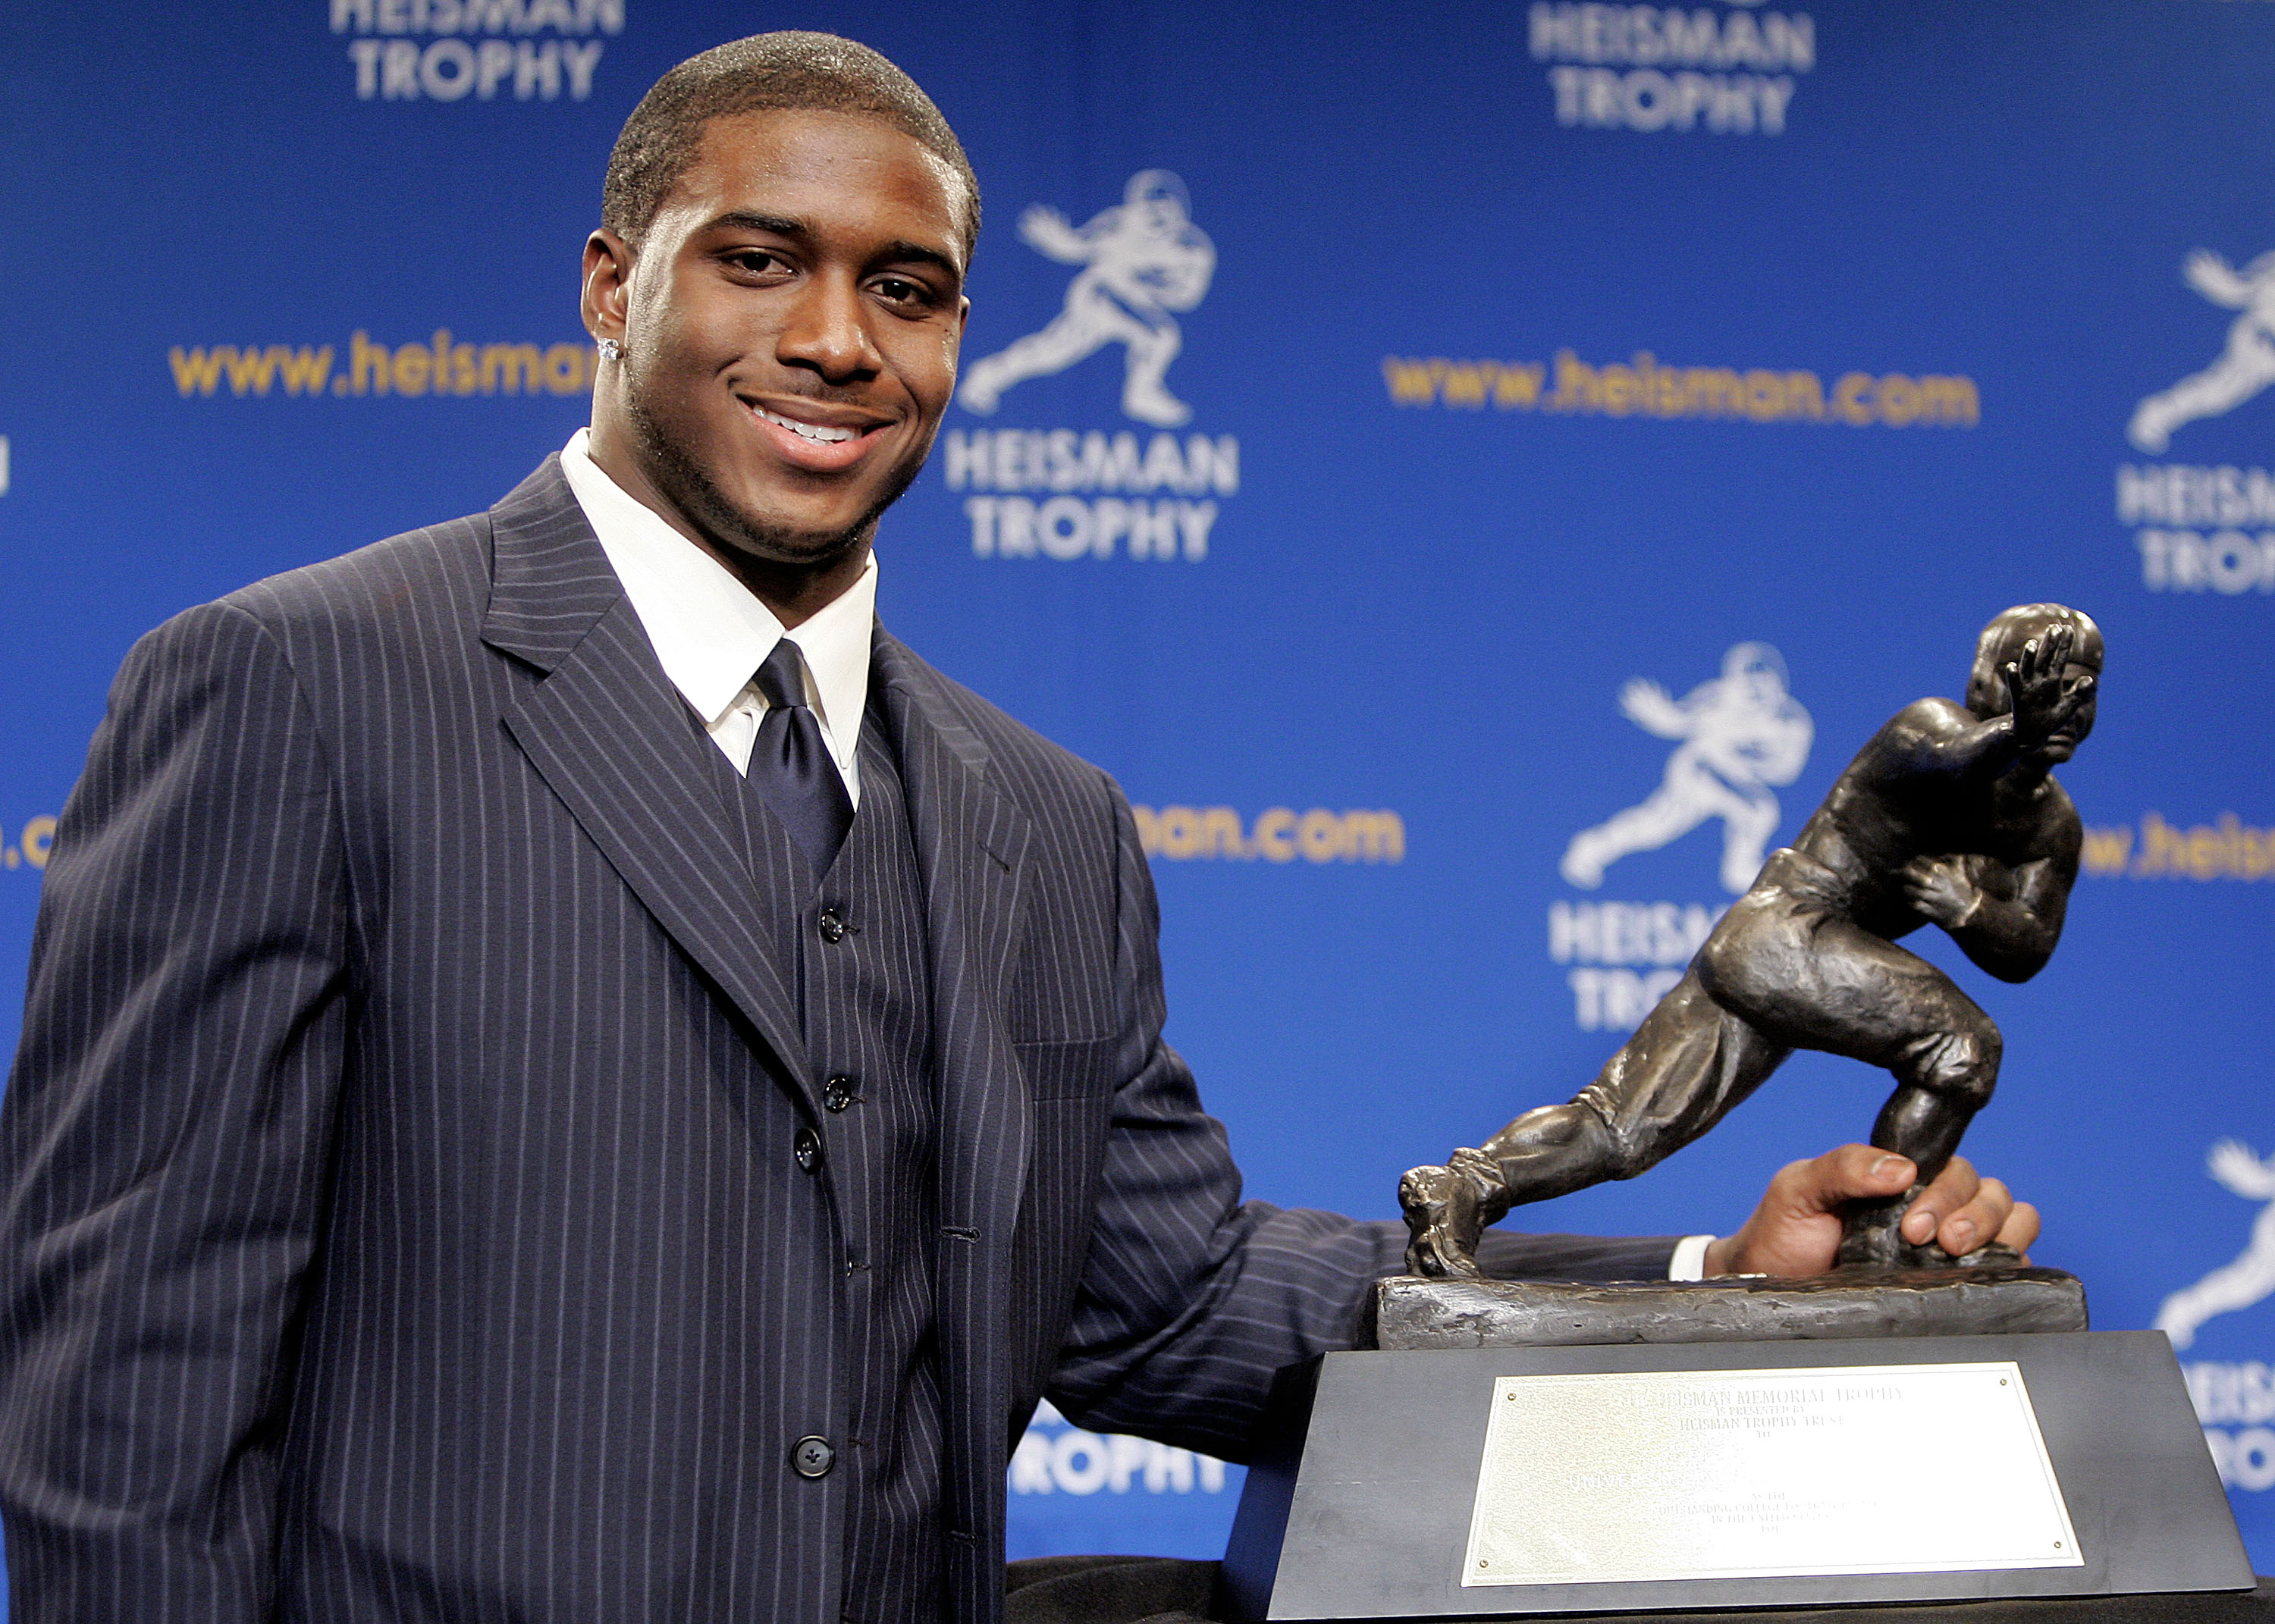 NEW YORK - DECEMBER 10:  Running back Reggie Bush #5 of the USC Trojans poses with the 2005 Heisman trophy after winning the award at the 71st Annual Heisman Ceremony on December 10, 2005 in New York City.  (Photo by Stephen Chernin/Getty Images)